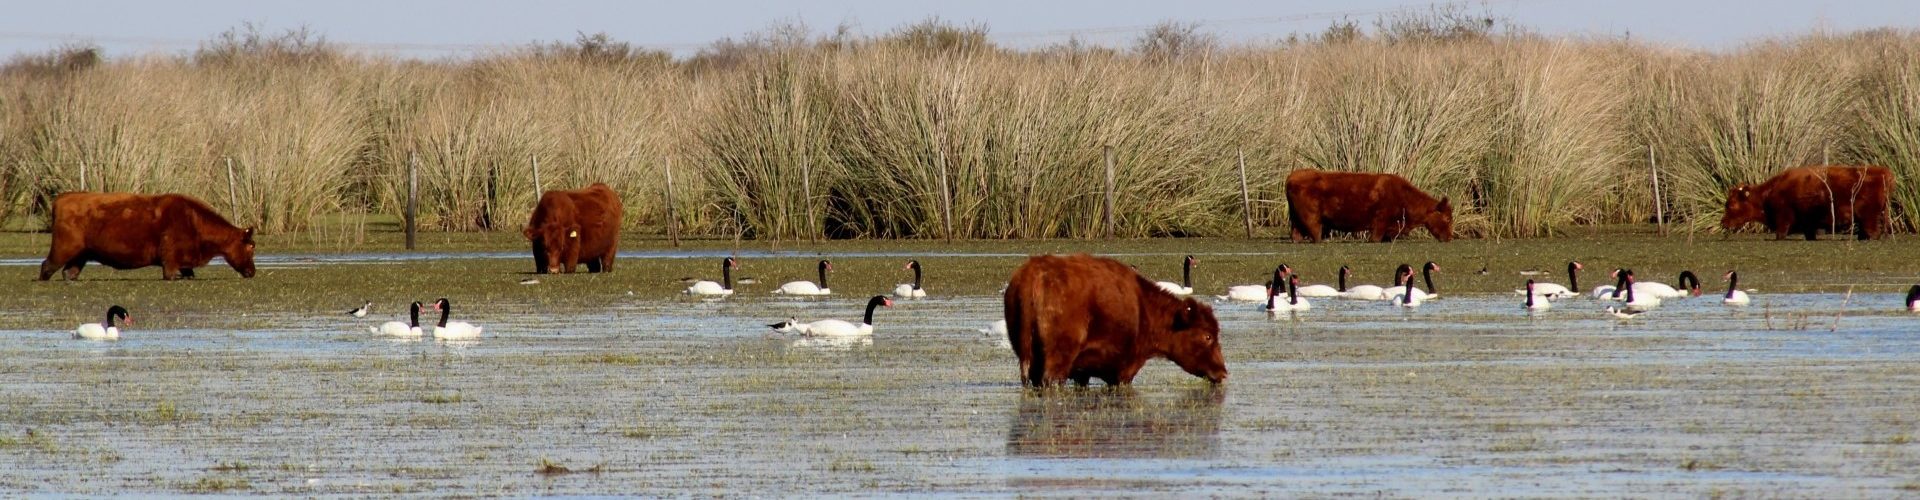 Cattle and birds in the water near an island in the Parana Delta. A photo by Ruben Quintana